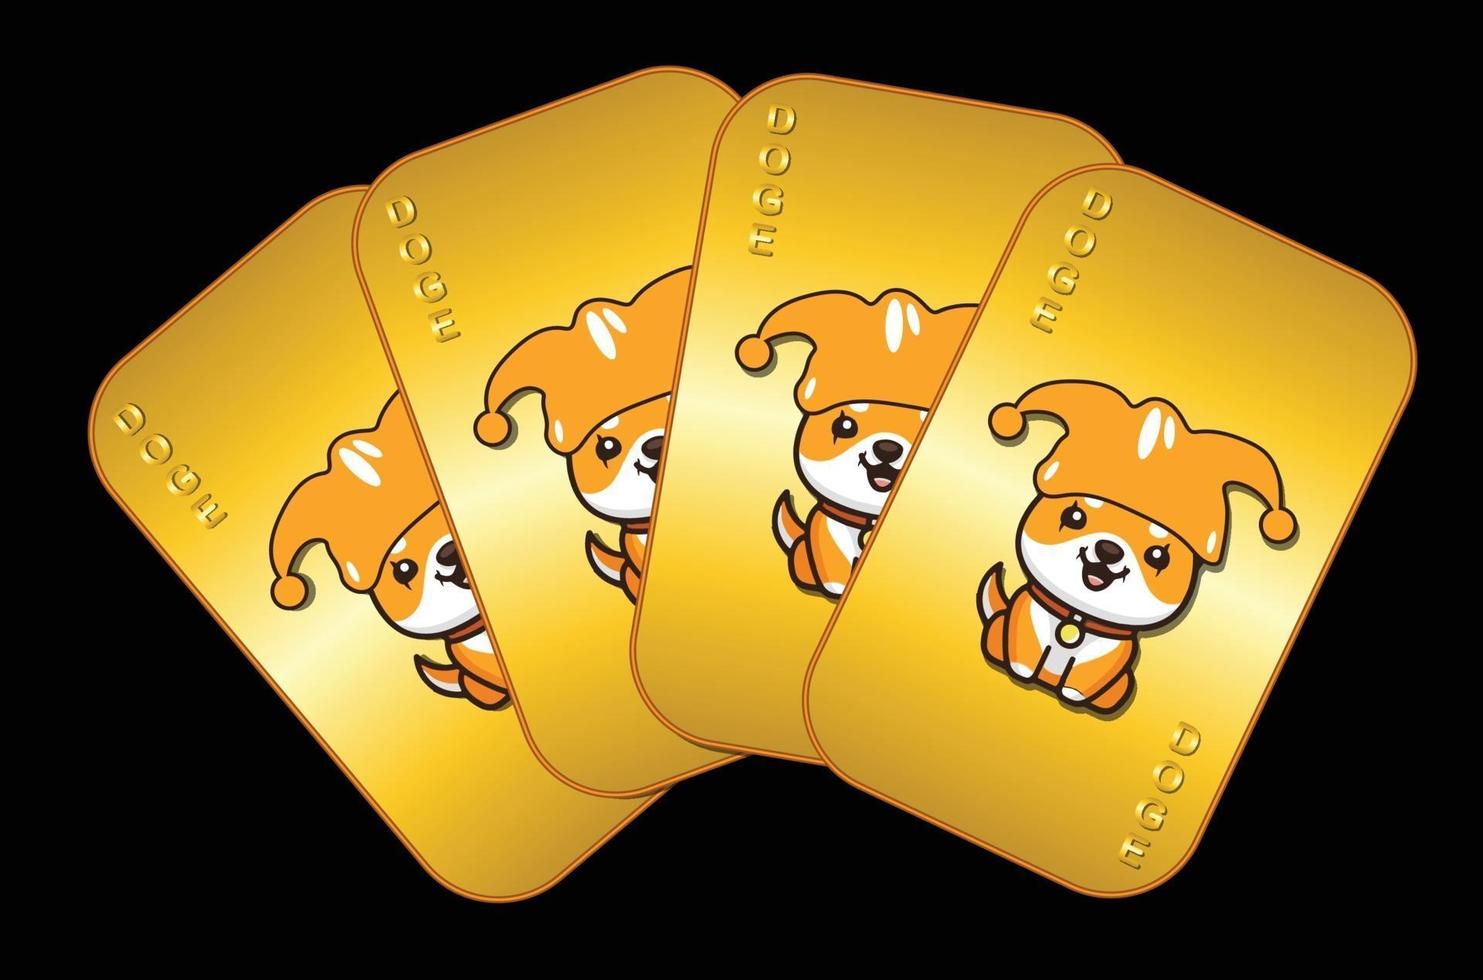 baby doge crypto currency card illustration with golden colour vector